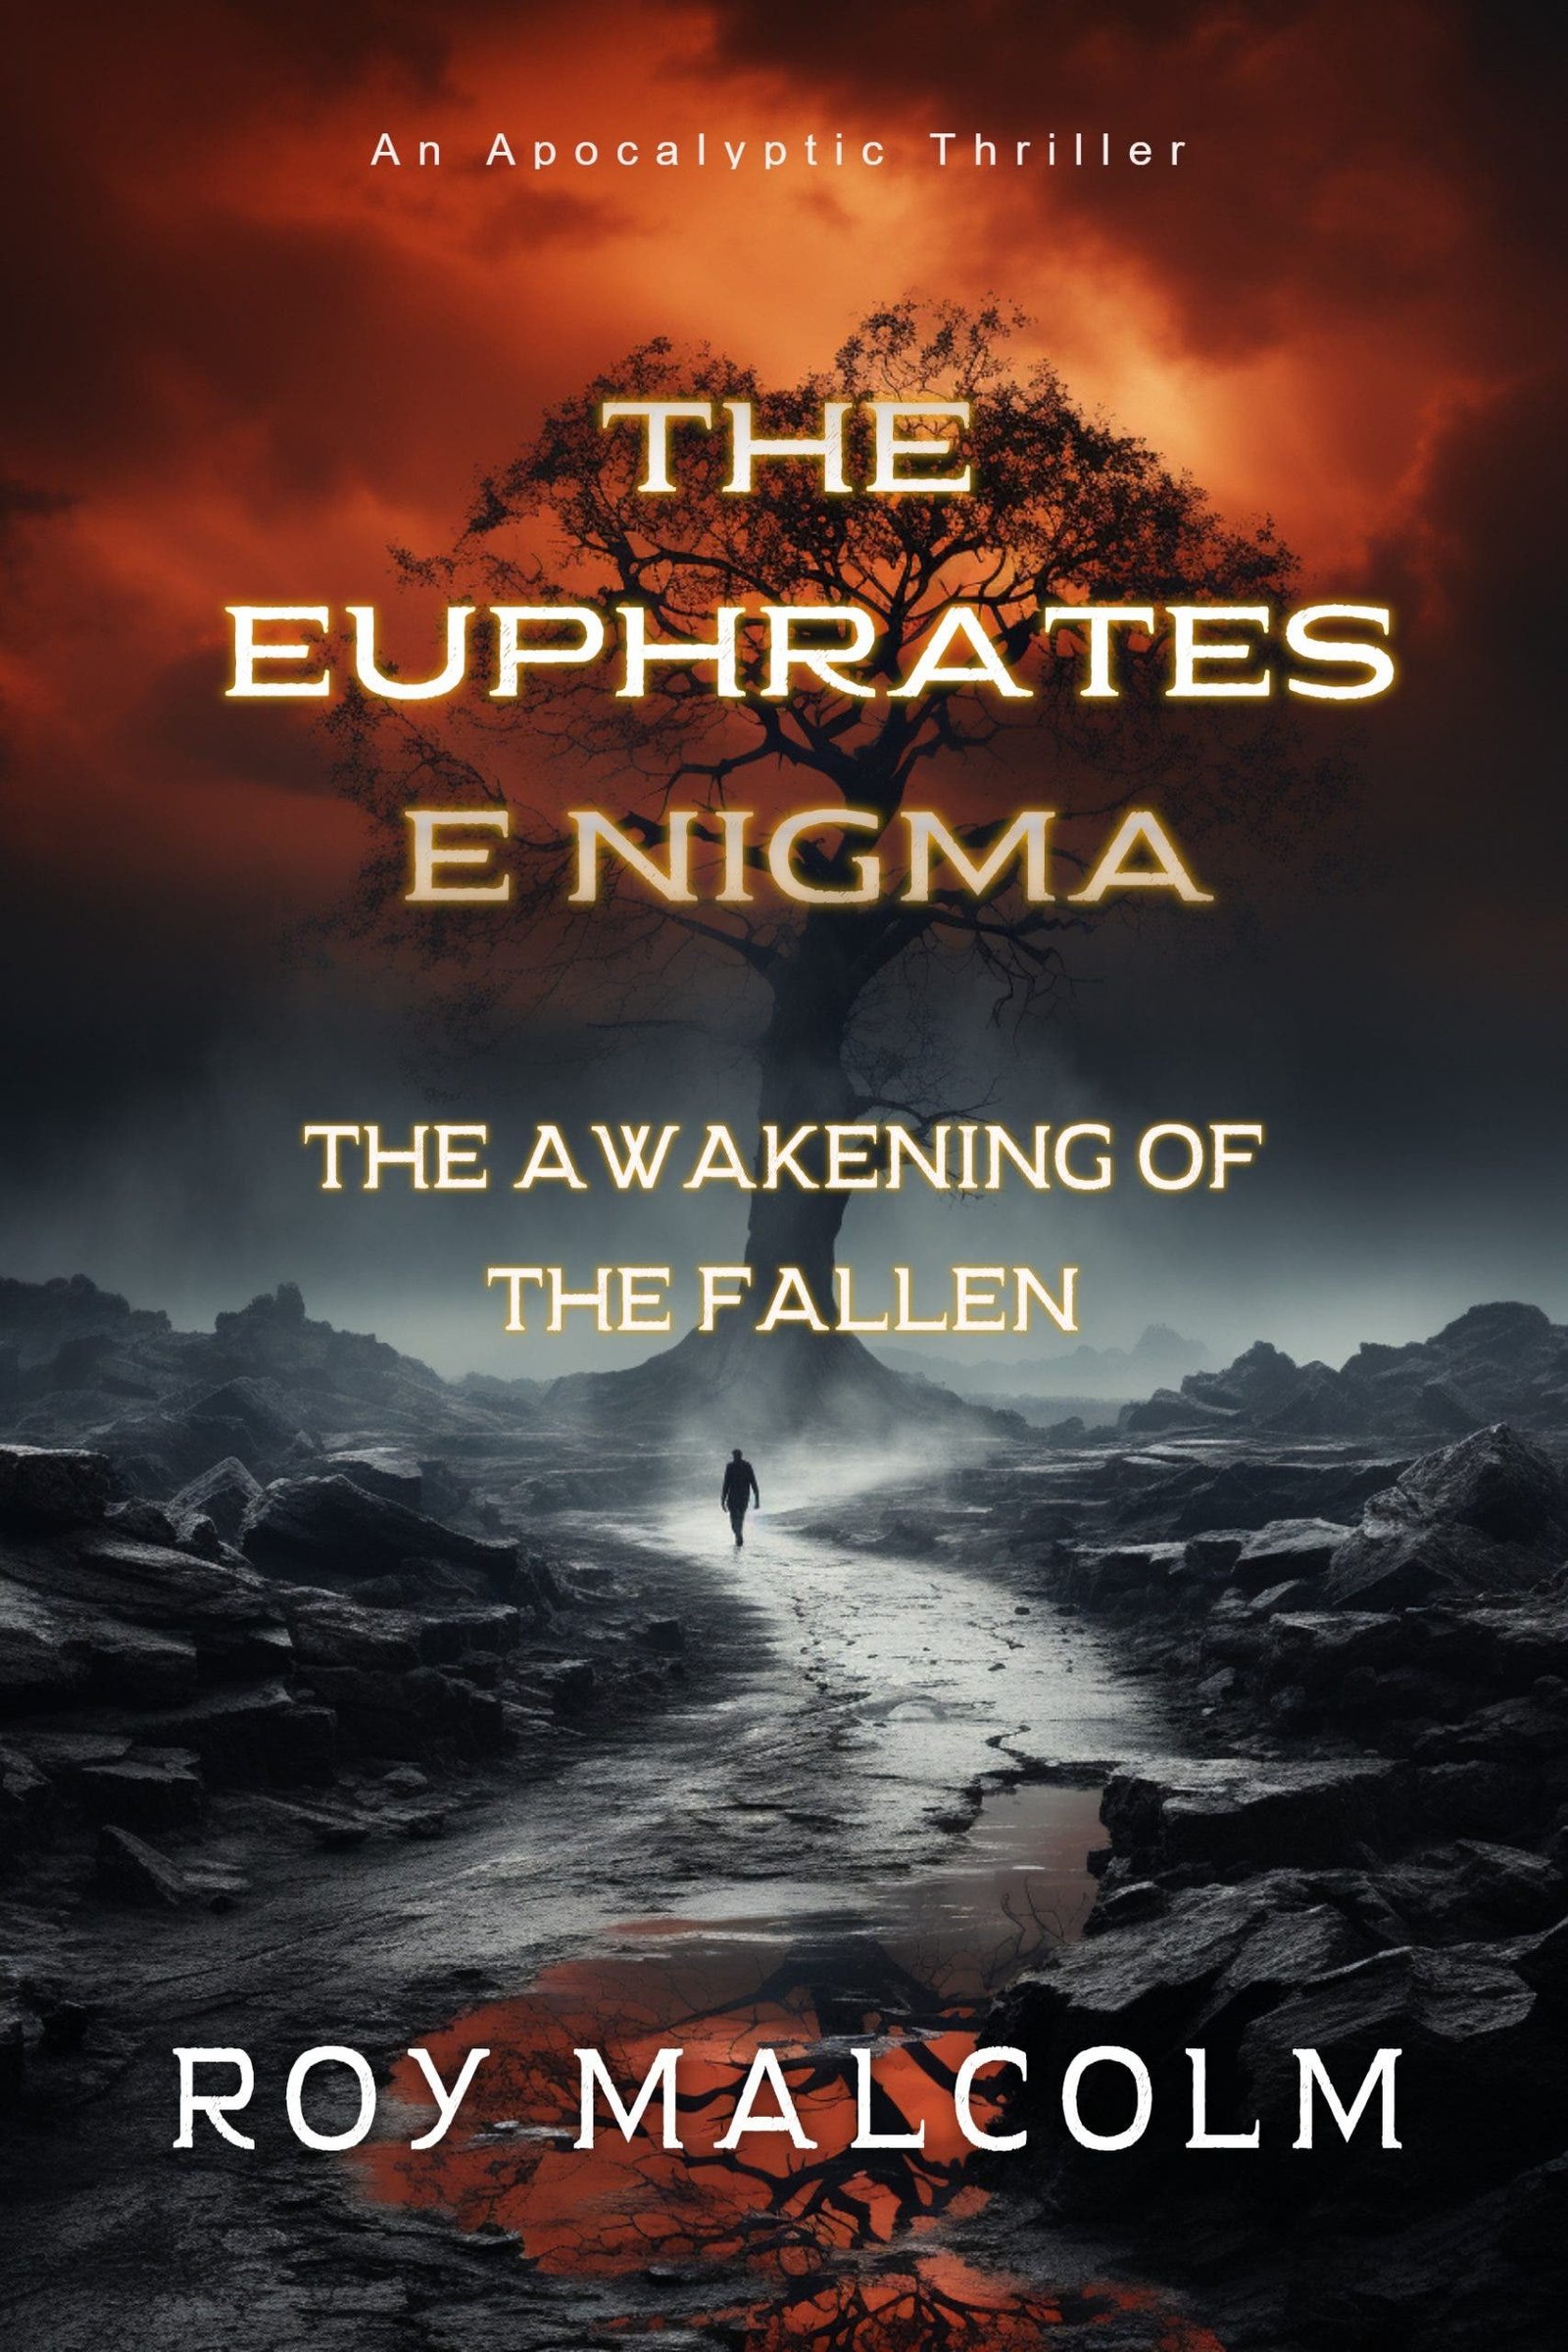 The Euphrates Enigma The Awakening of the Fallen is Now Available on Amazon